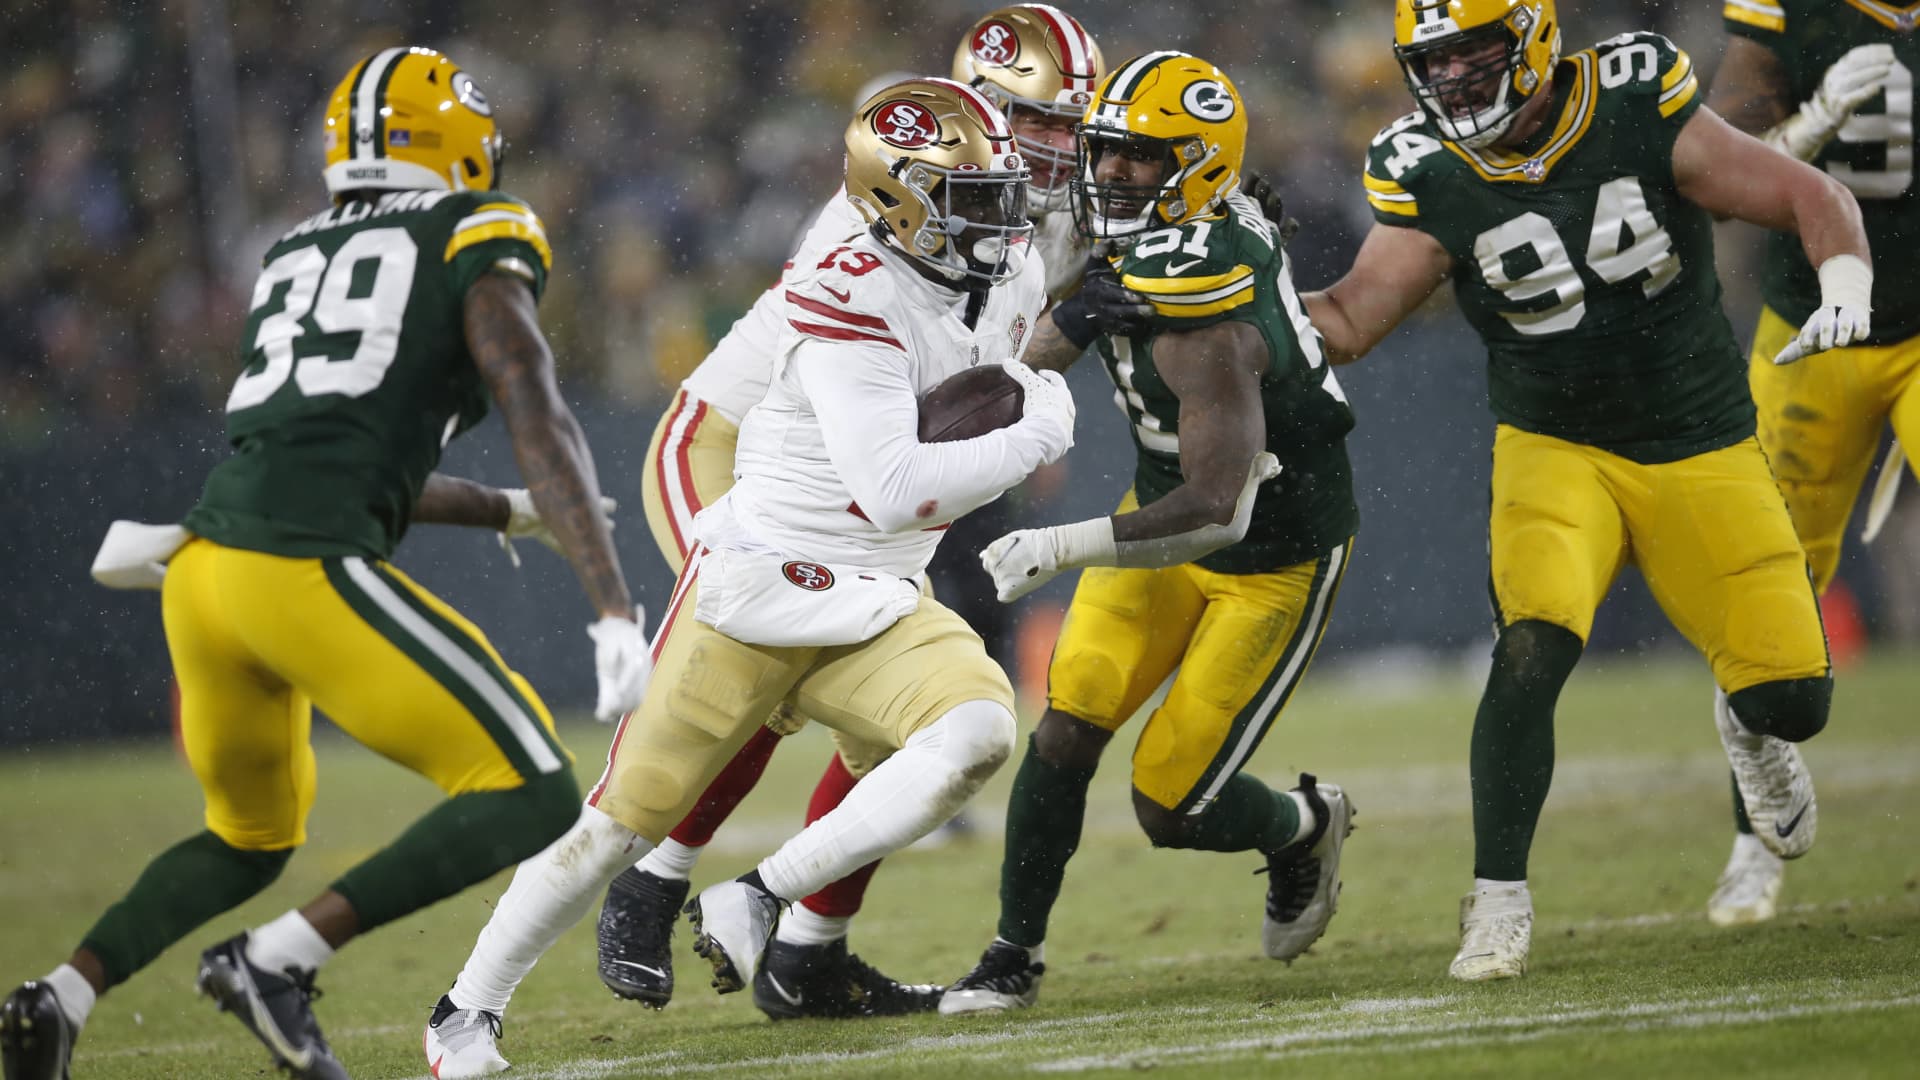 Deebo Samuel #19 of the San Francisco 49ers rushes during the game against the Green Bay Packers in the NFC Divisional Playoff game at Lambeau Field on January 22, 2022 in Green Bay, Wisconsin.